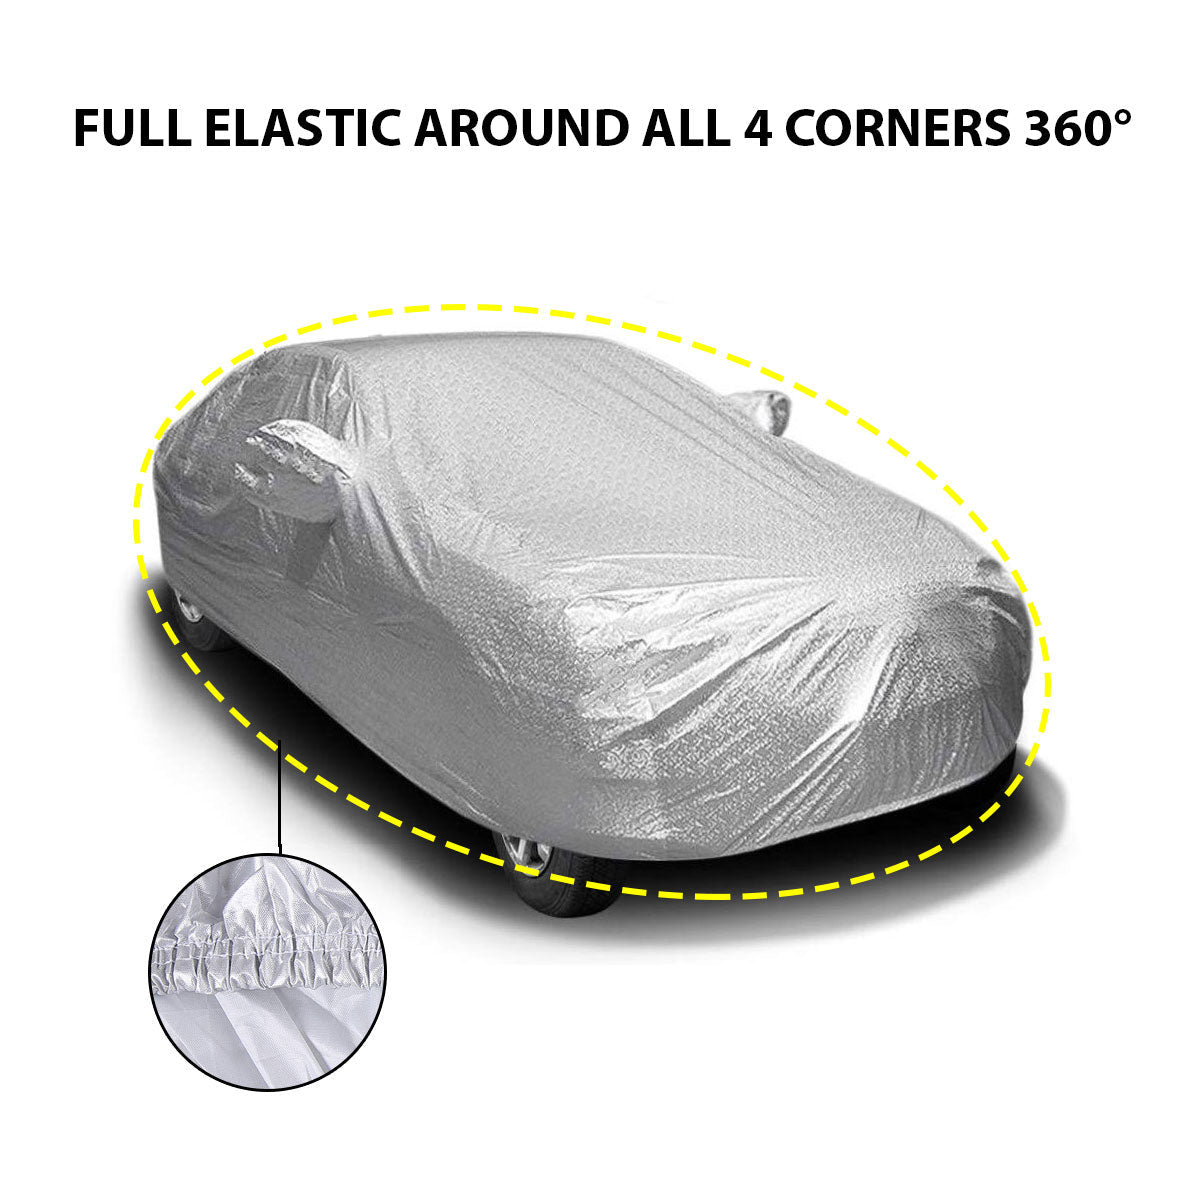 Oshotto Spyro Silver Anti Reflective, dustProof Silver and Water Proof Silver Car Body Cover with Mirror Pockets For Audi A3